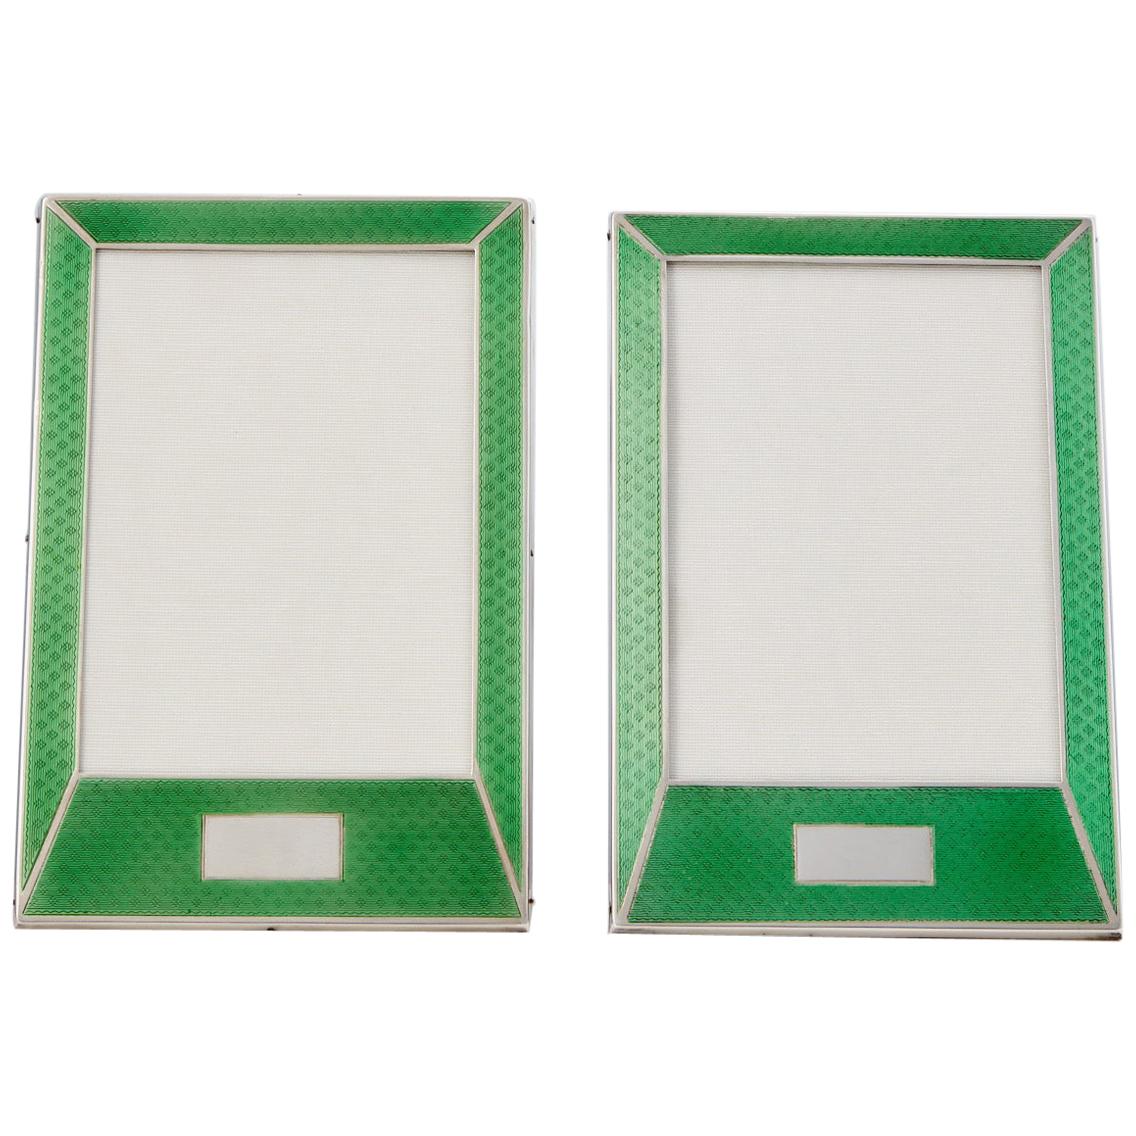 Pair of 20th Century Art Deco Sterling Silver and Enamel Photograph Frames, 1927